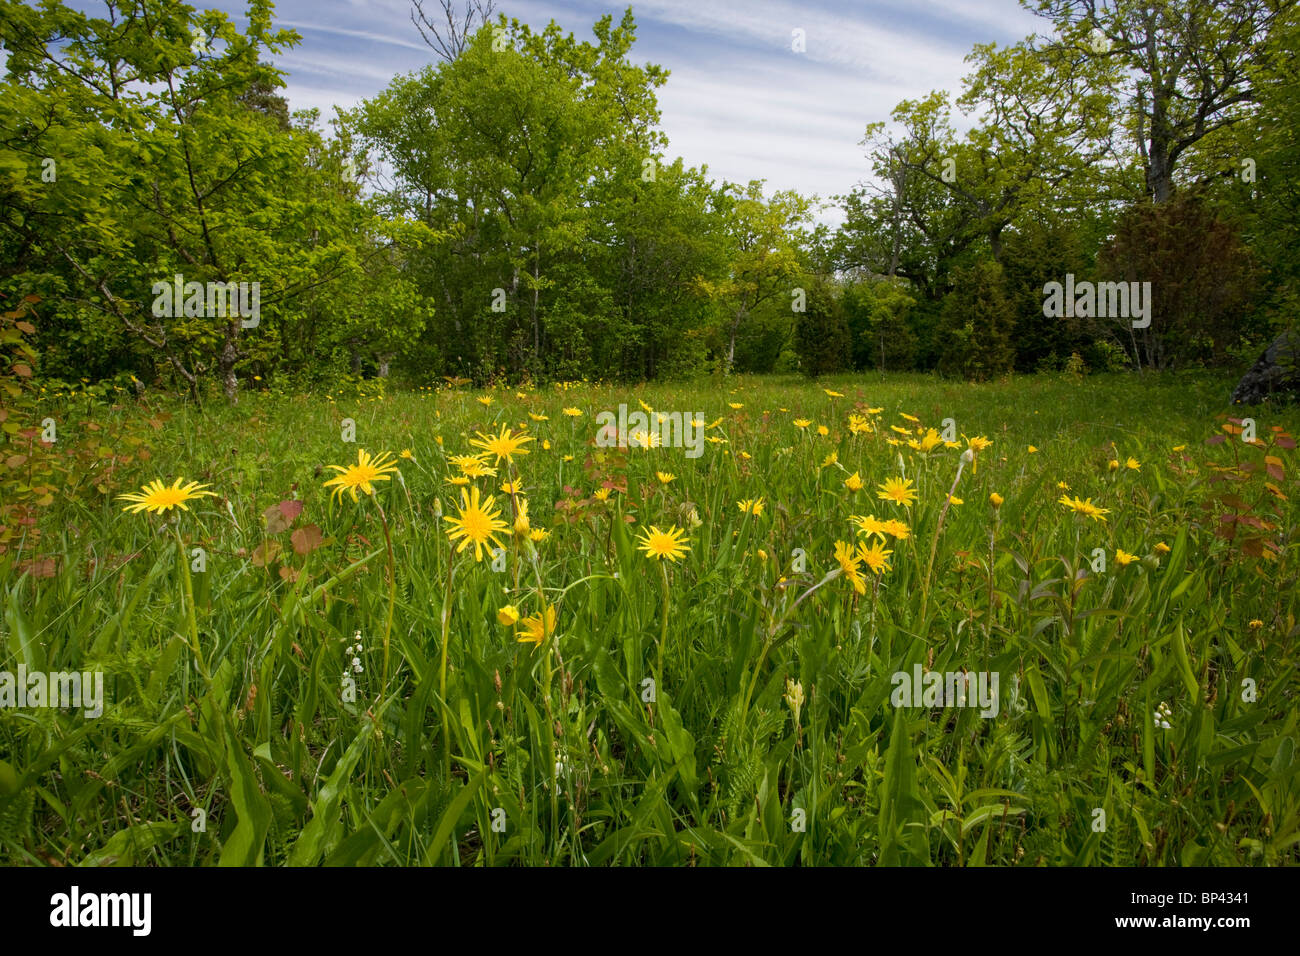 Viper's-grass in grassland in beautiful ancient flowery wood pasture or wooded meadow at Loode Oakwood or Oak Grove, Saarema Stock Photo